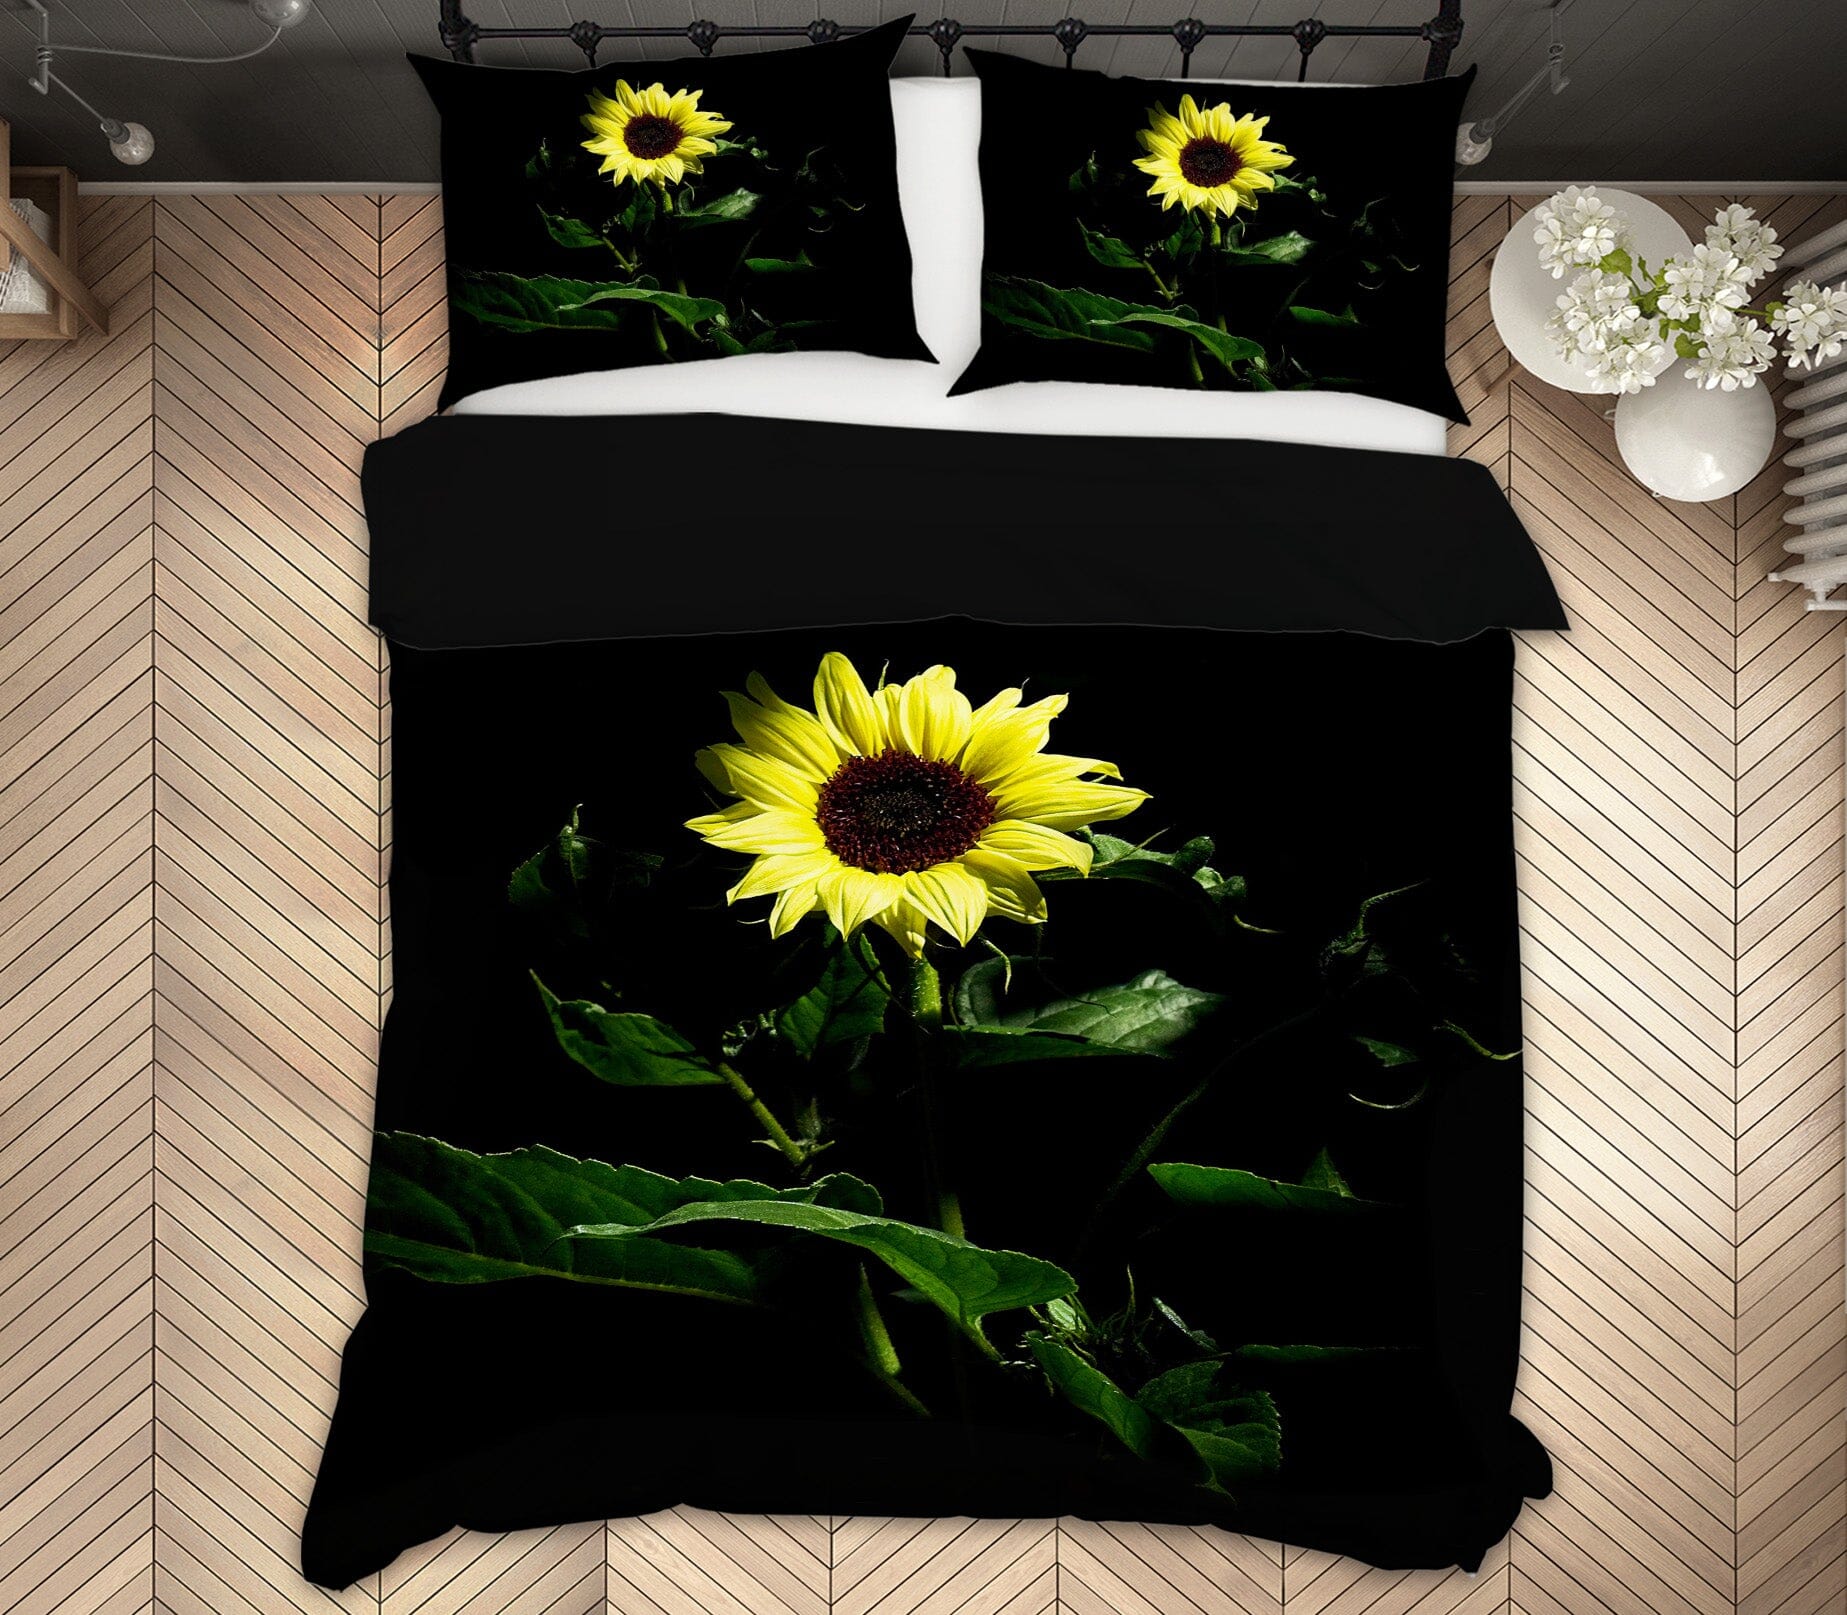 3D Sunflower 2130 Kathy Barefield Bedding Bed Pillowcases Quilt Quiet Covers AJ Creativity Home 